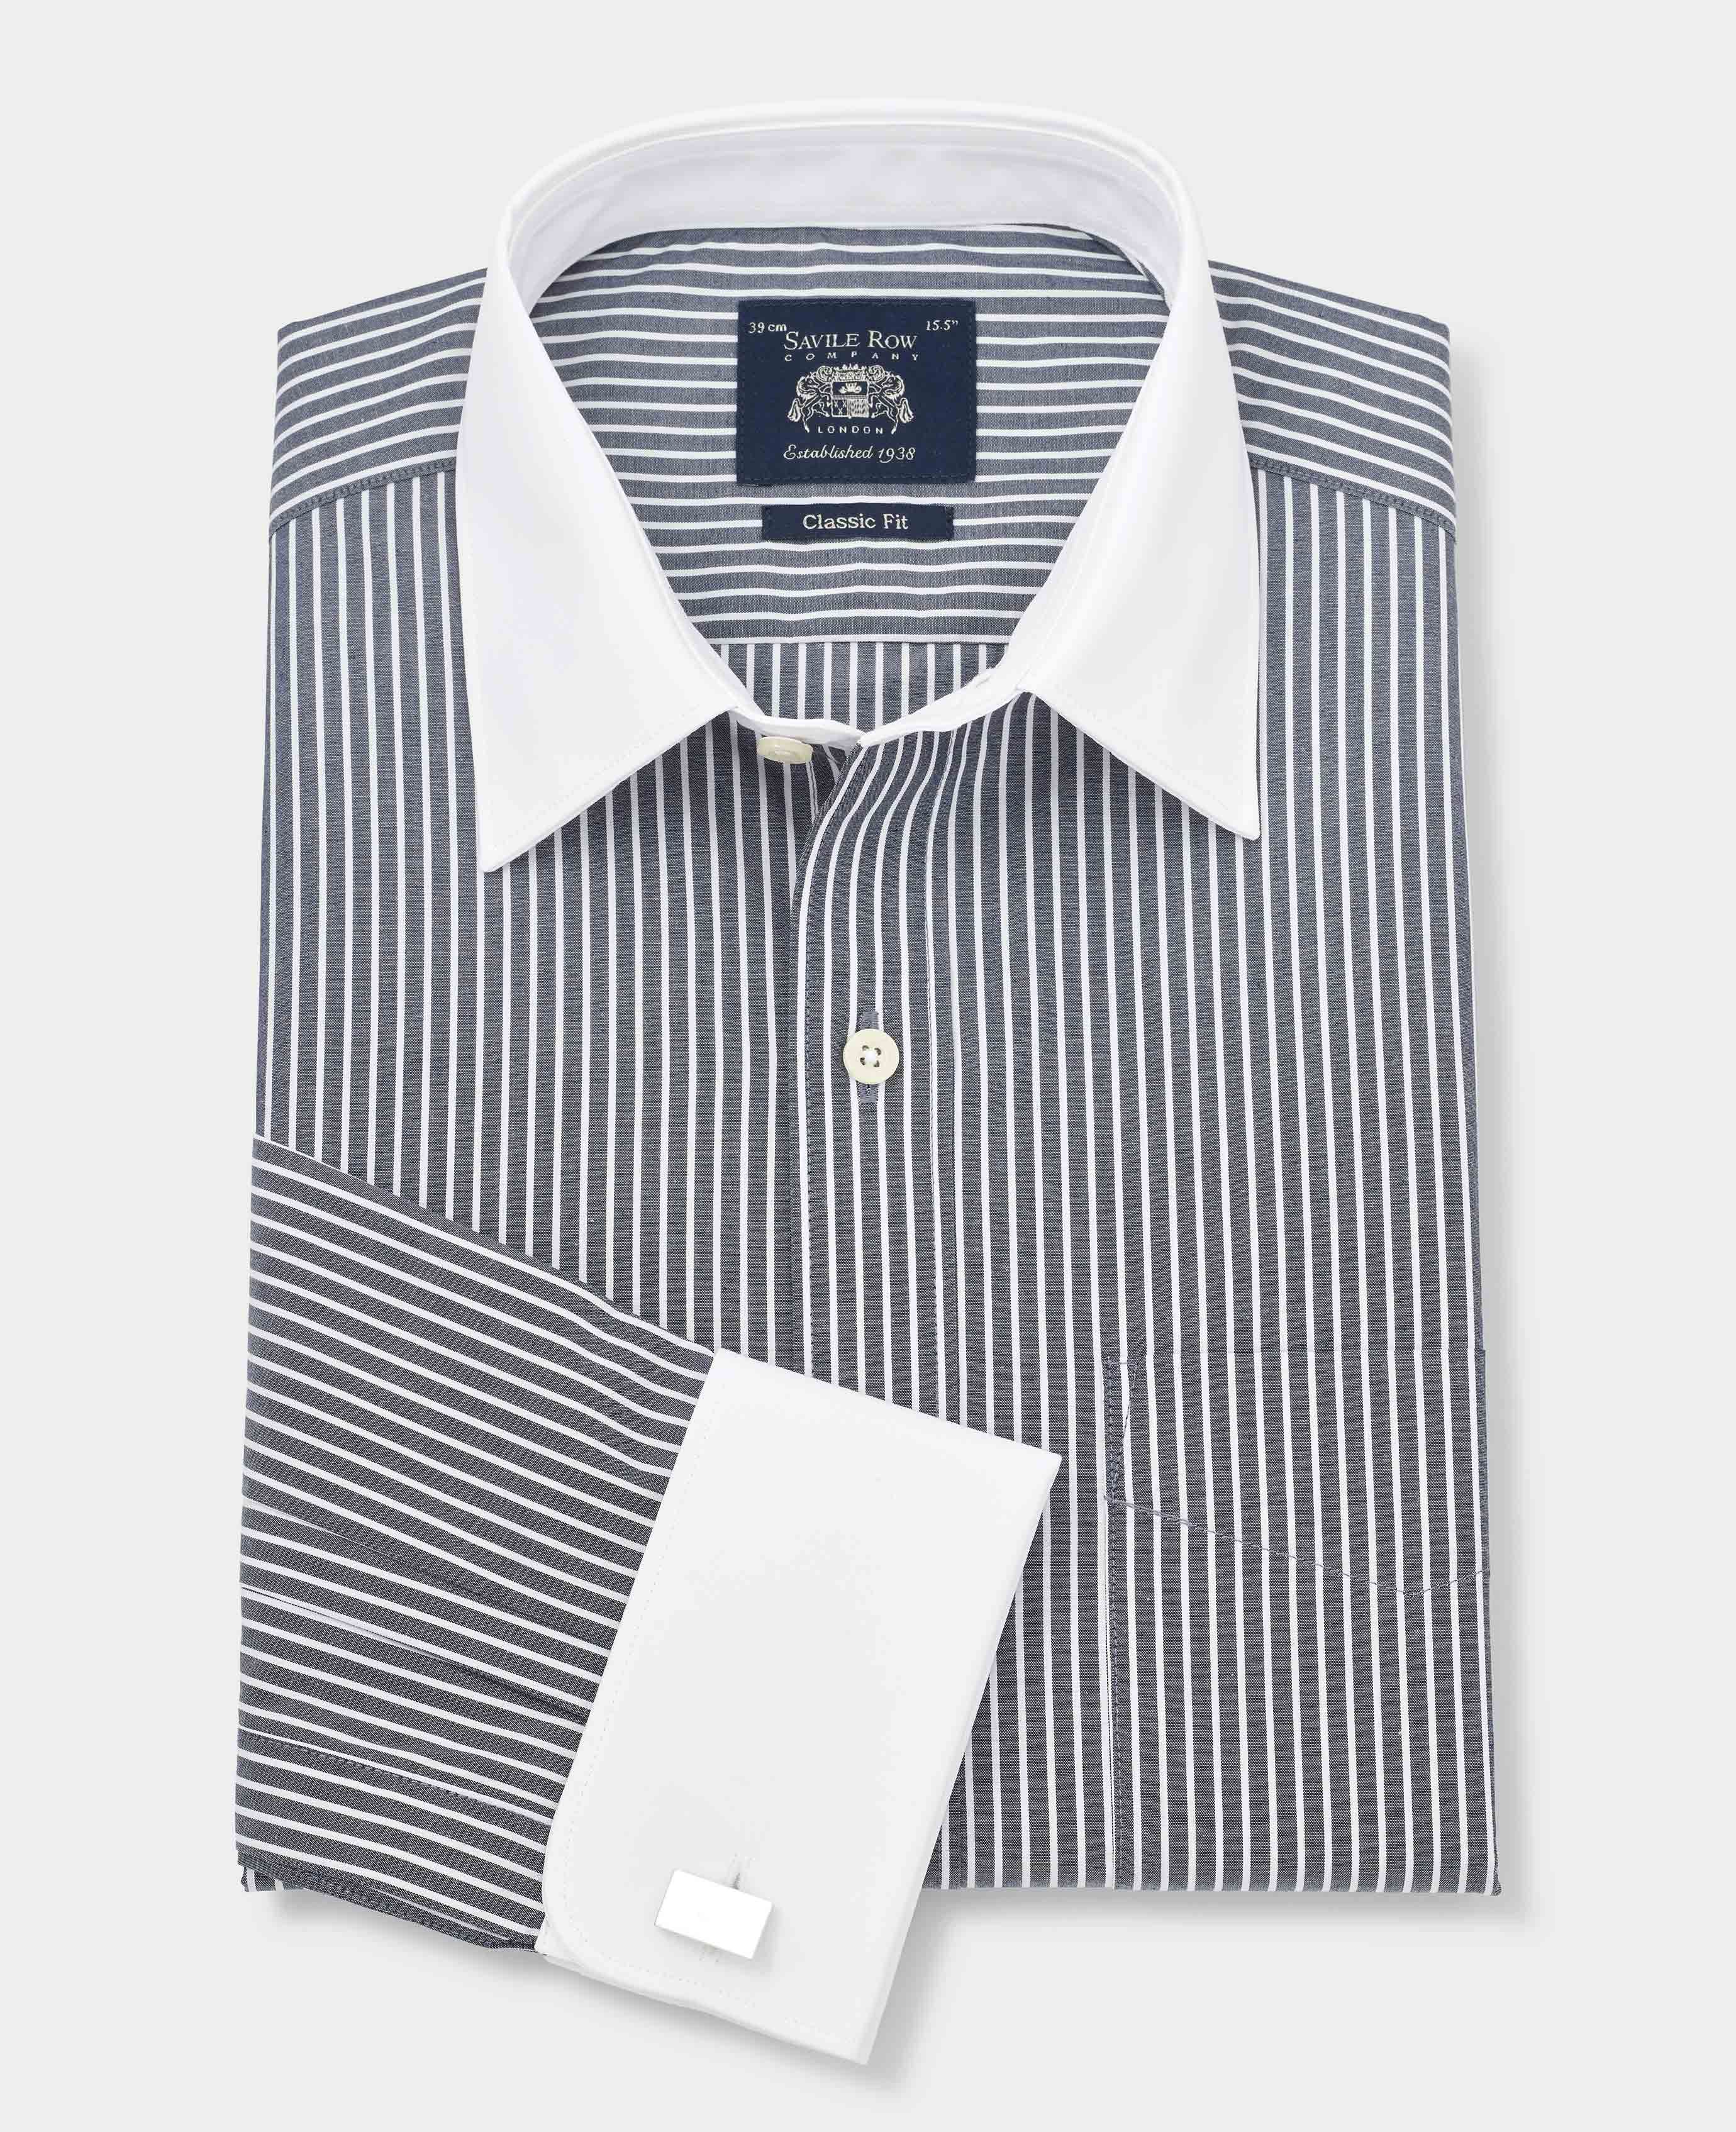 Men’s black and white stripe shirt with contrast cuffs | Savile Row Co